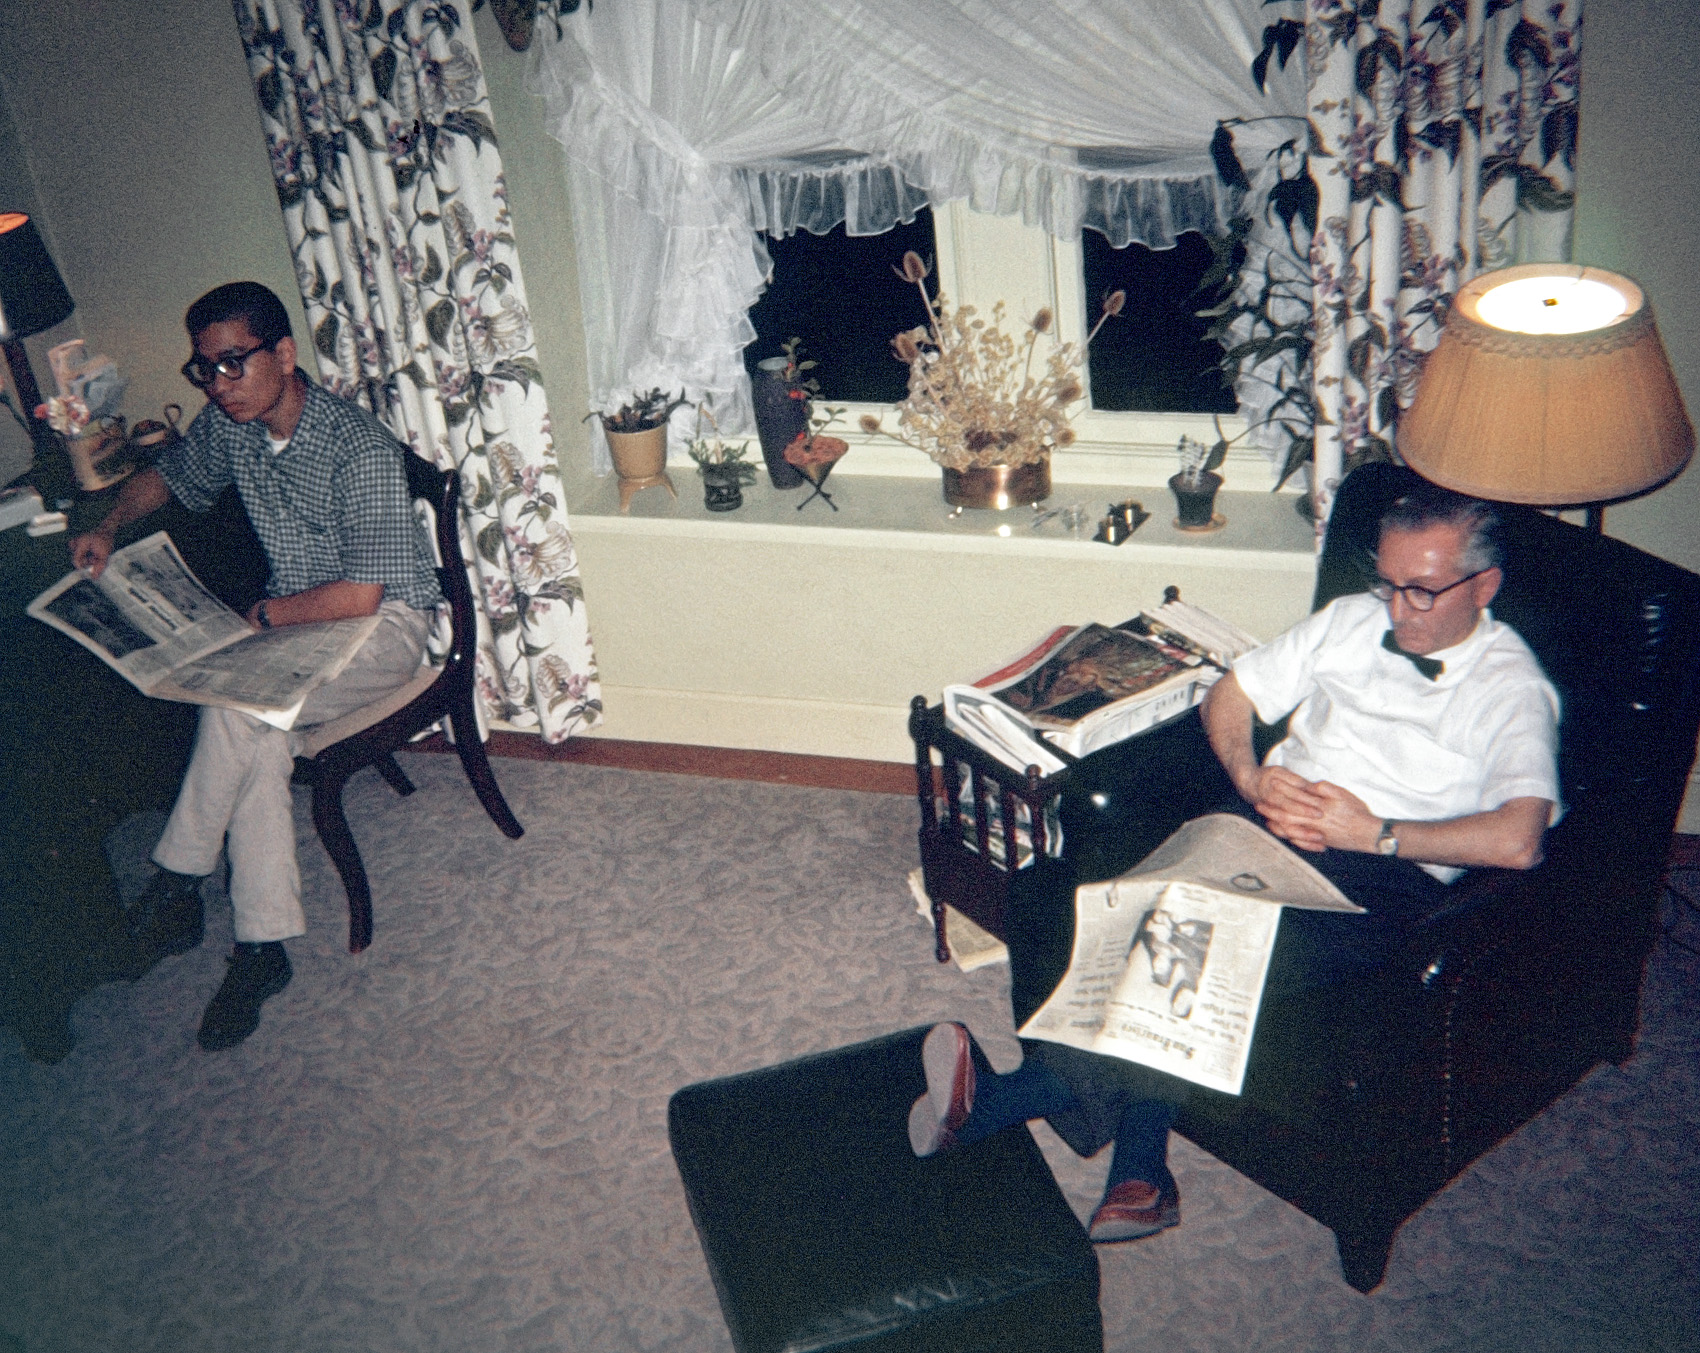 My father, in his comfy leather chair, and our houseguest Bob have their eyes glued to the TV, almost undoubtedly watching the news. We don't know what that news was or its import, but a headline in the San Francisco Examiner reflects an epochal moment: "7 Men Ready for First Space Flight." Three months later Alan Shepard was the one of those Project Mercury astronauts to do it. This 127 Ektachrome transparency has a processing date of February 1961 on the mount.

Bob, a Cal Poly classmate of my brother's, lived with us for a bit while apartment-hunting. Father's clip-on bow tie is actually part of his Jolly Store grocery clerk outfit, indicating he probably just got home, pausing just long enough to slip into his slippers. We also continue the saga of Mother's window treatment, with different-but-similar drapes and curtains. Her love/hate relationship with African violets appears to be in the hate phase at the moment as there are none to be seen. I was standing on the stairway landing, thus the high angle. Man, that leather chair was comfy. View full size.